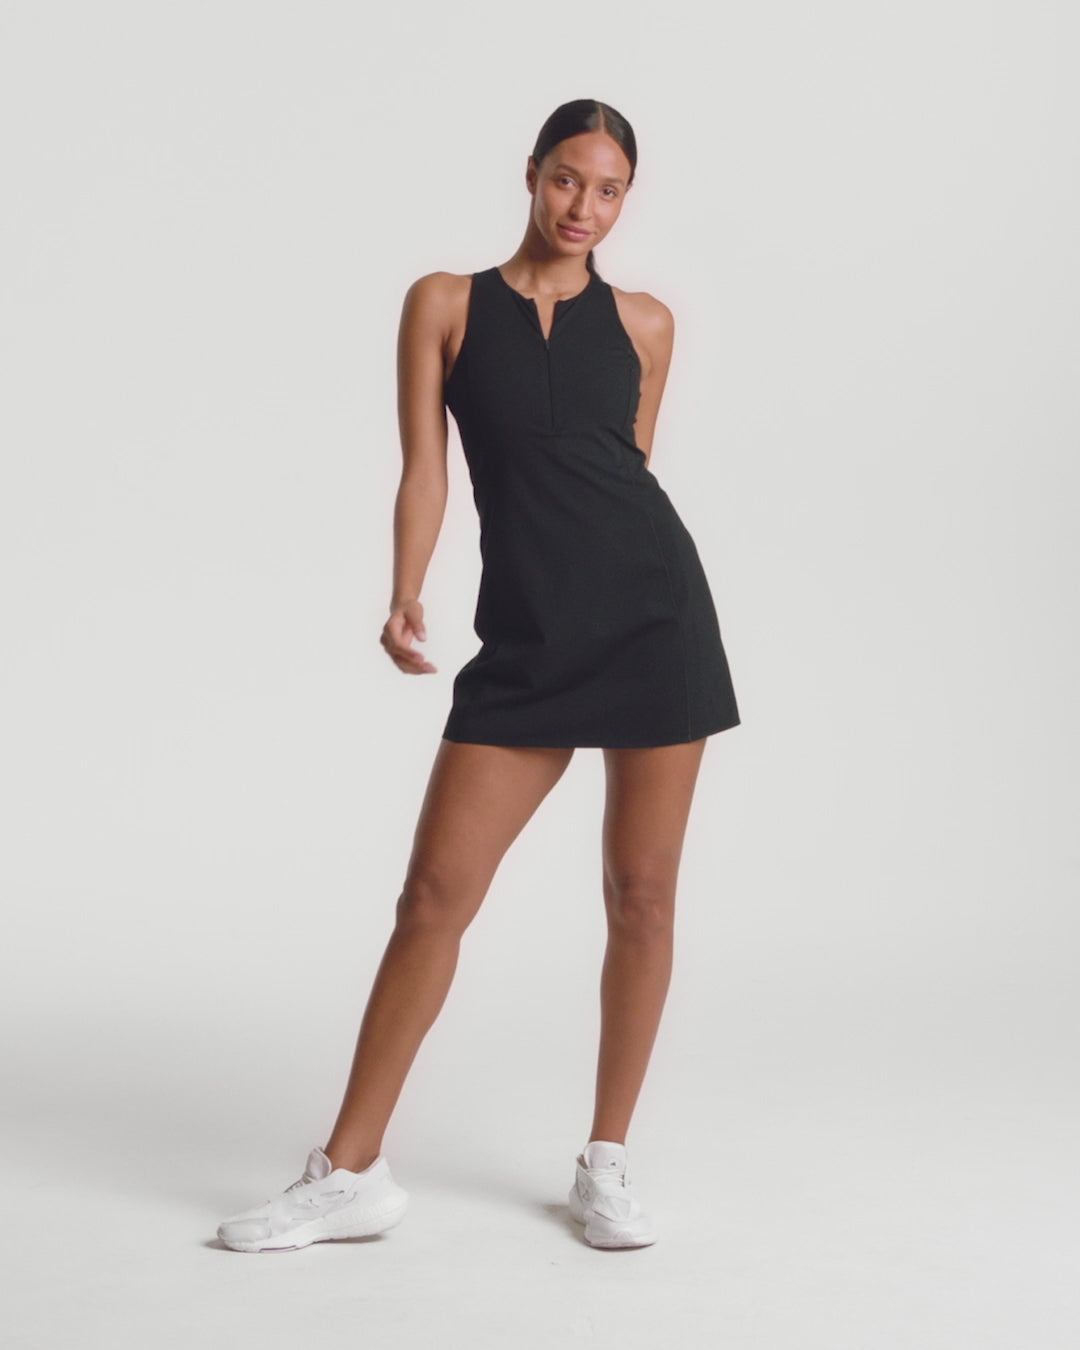 Get Moving Dress, Spanx – The G